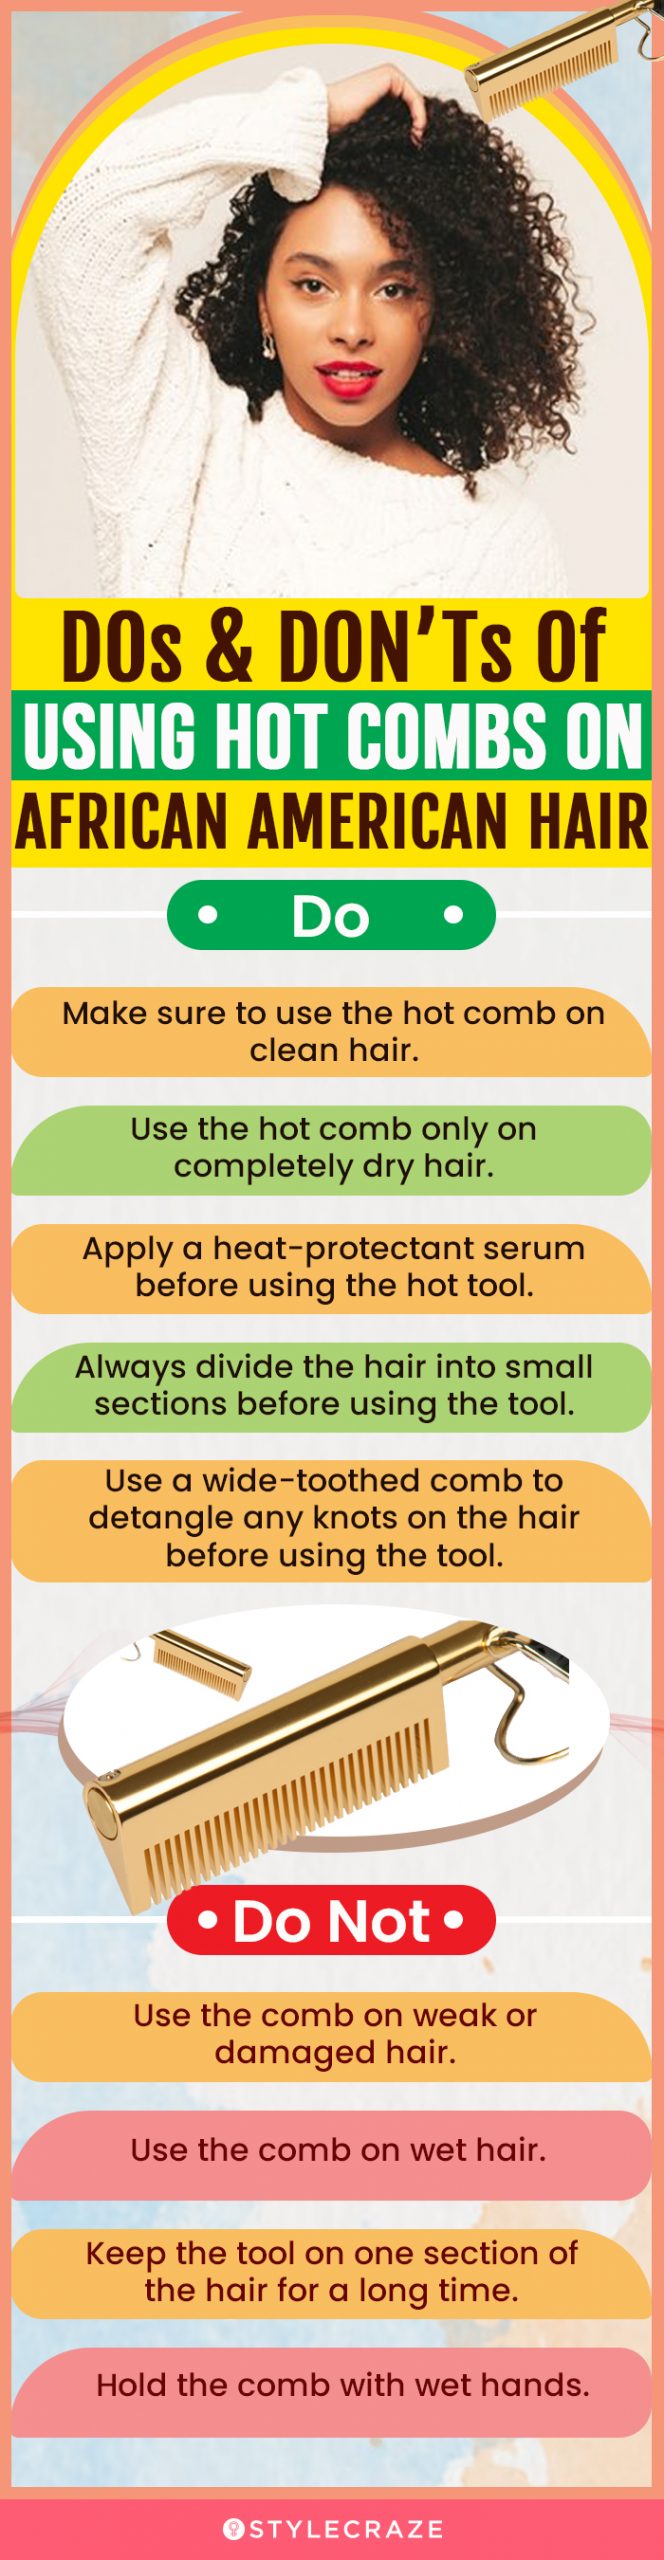 DOs & DON'Ts Of Using Hot Comb On African American Hair